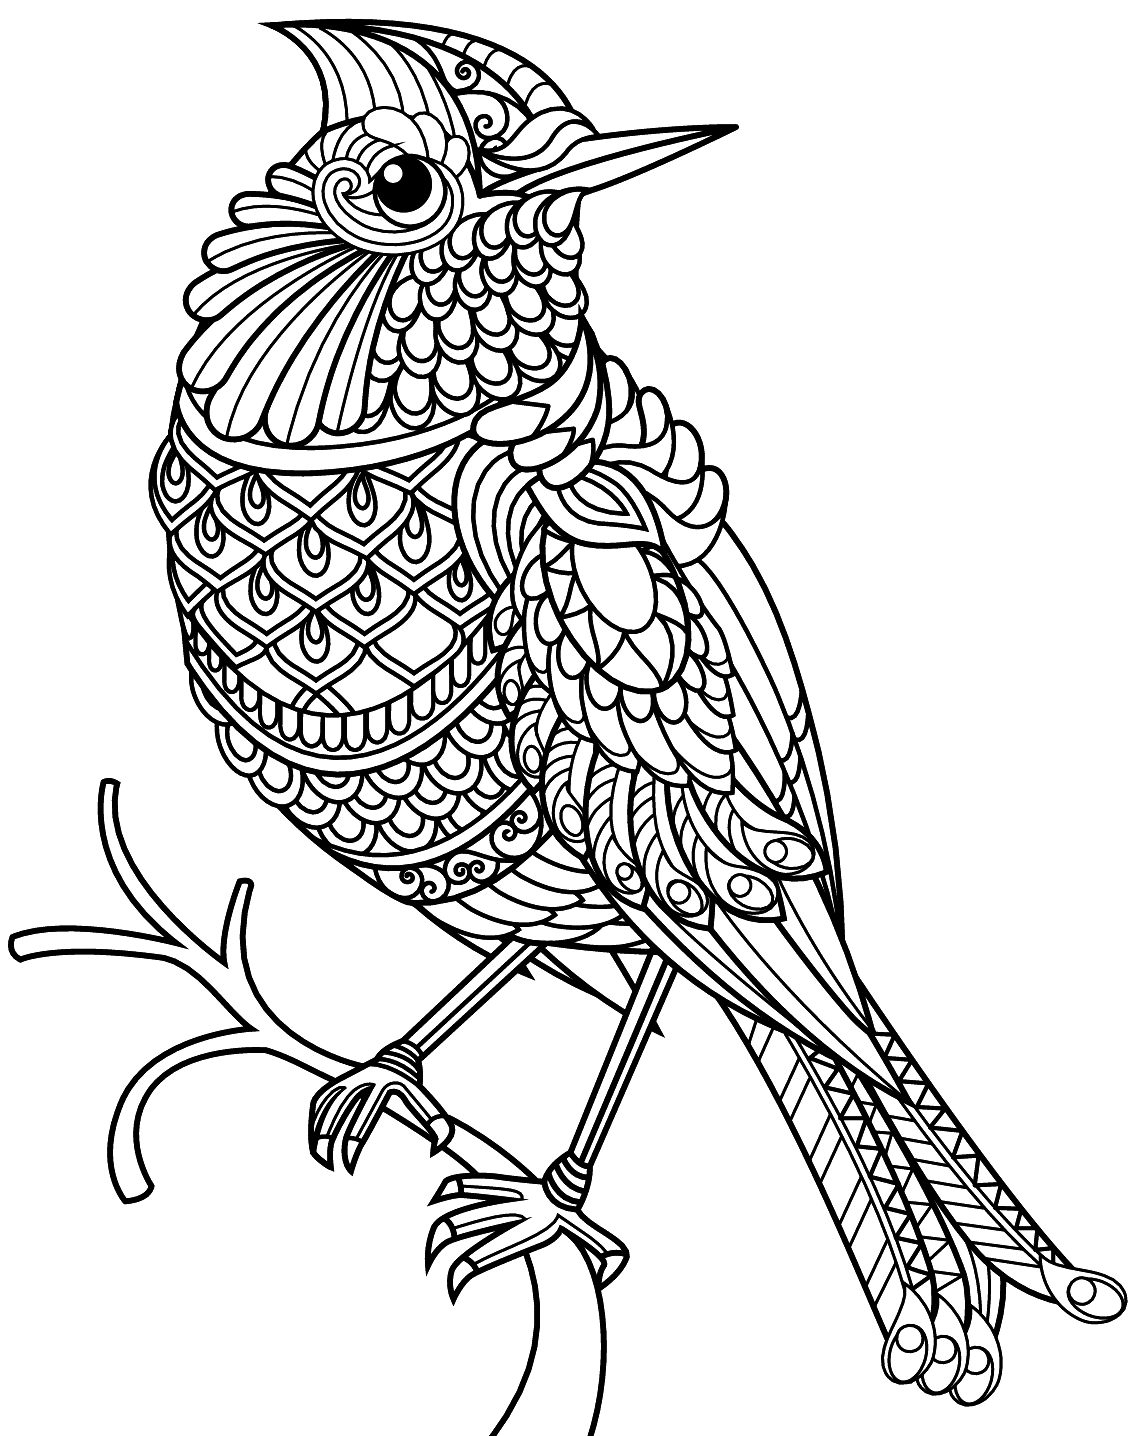 Patterned Bird Coloring Page